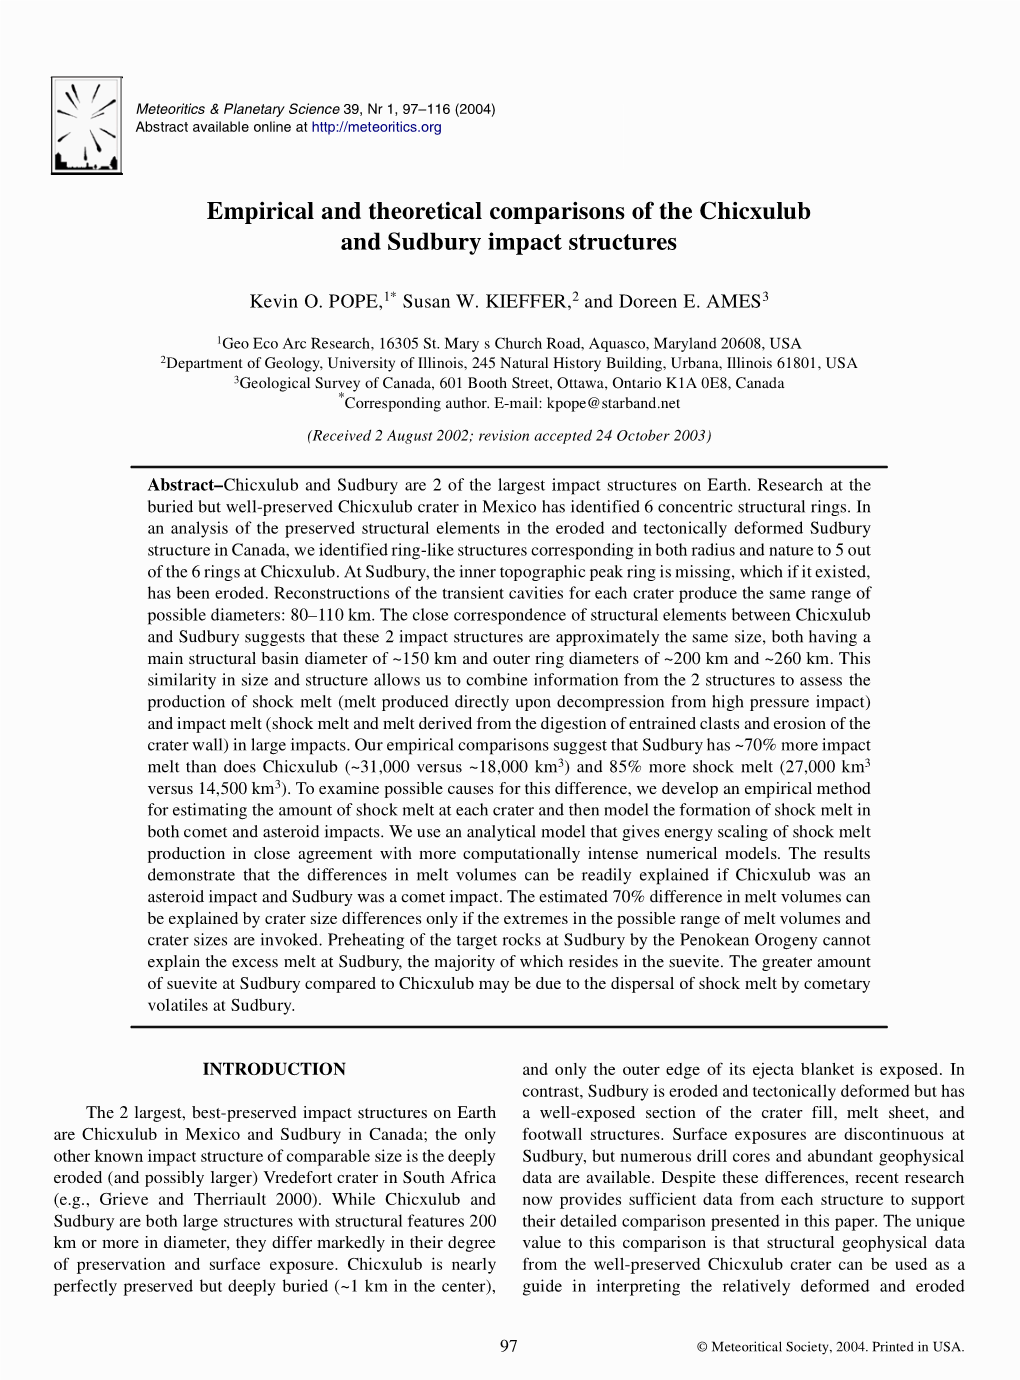 Empirical and Theoretical Comparisons of the Chicxulub and Sudbury